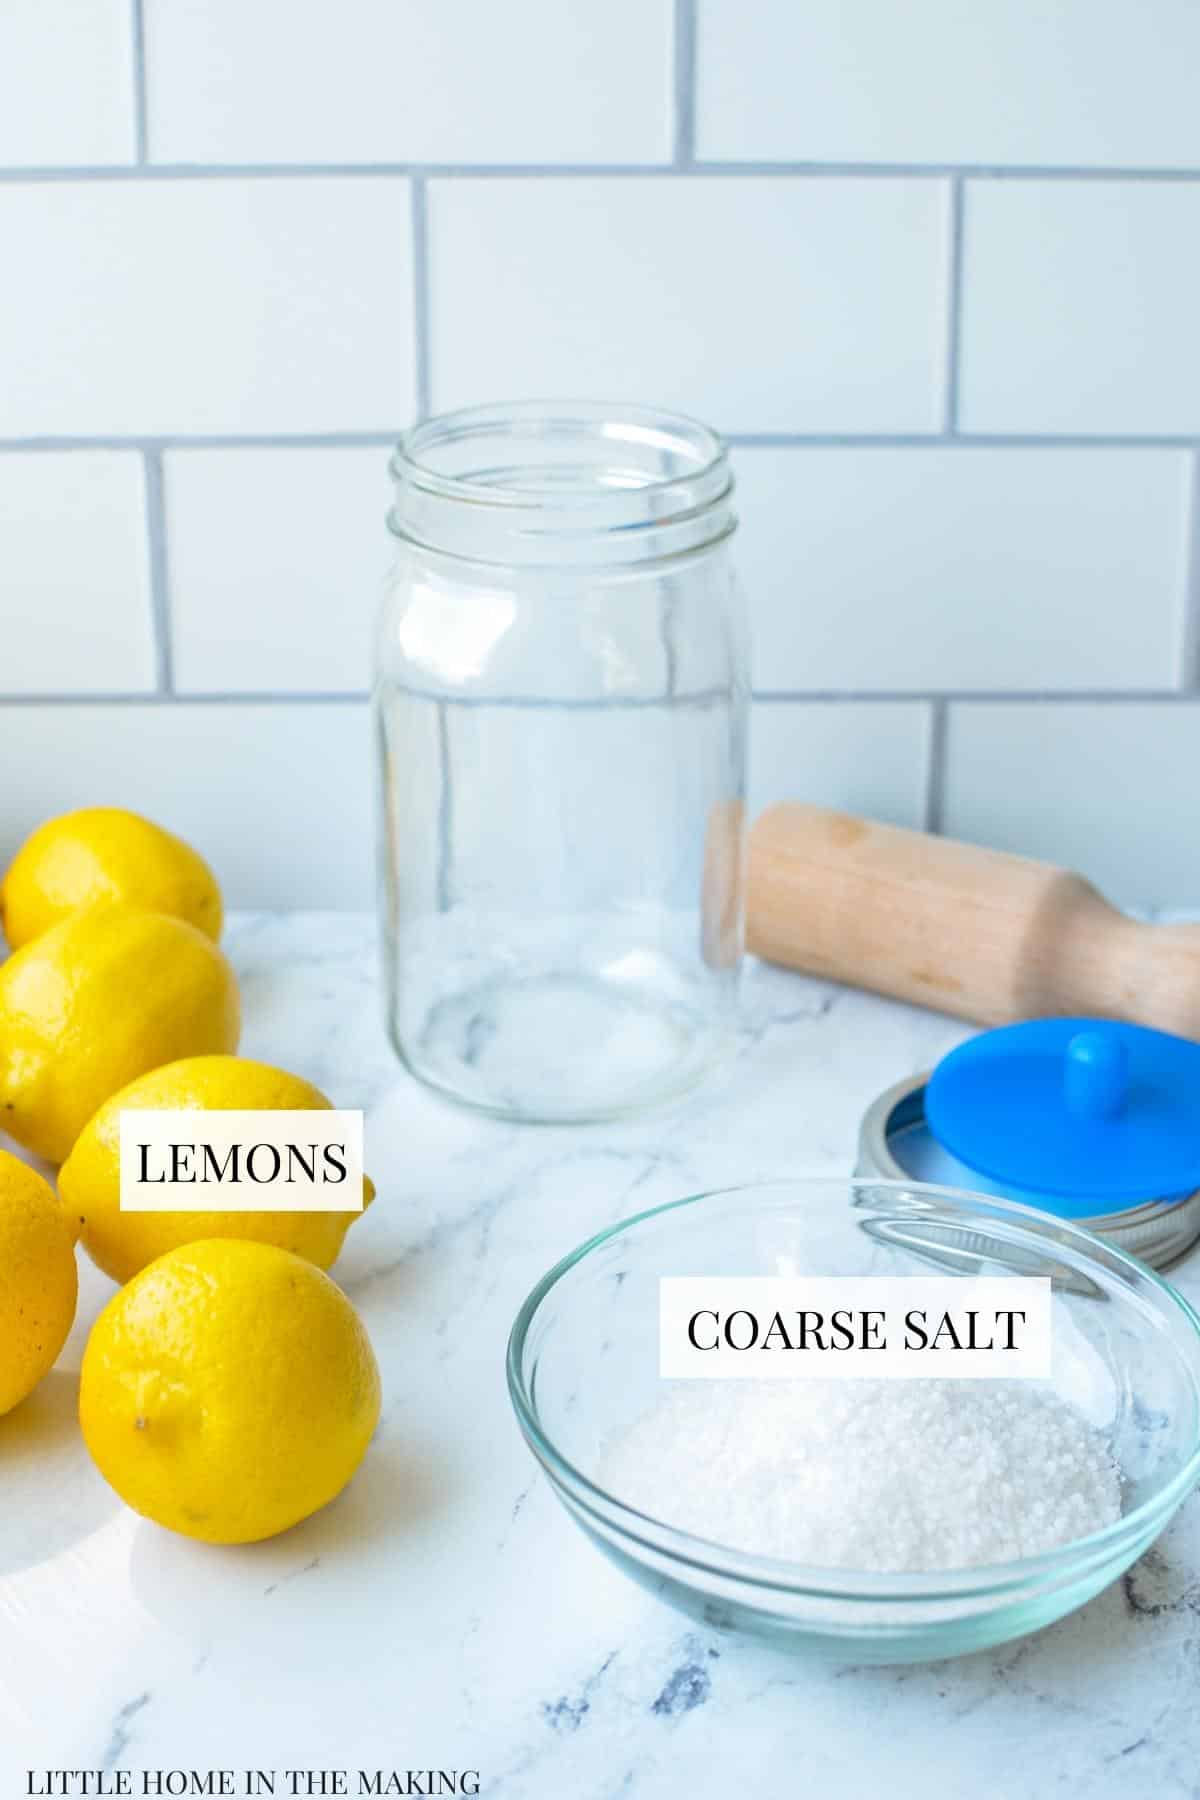 The ingredients needed to make fermented lemons.